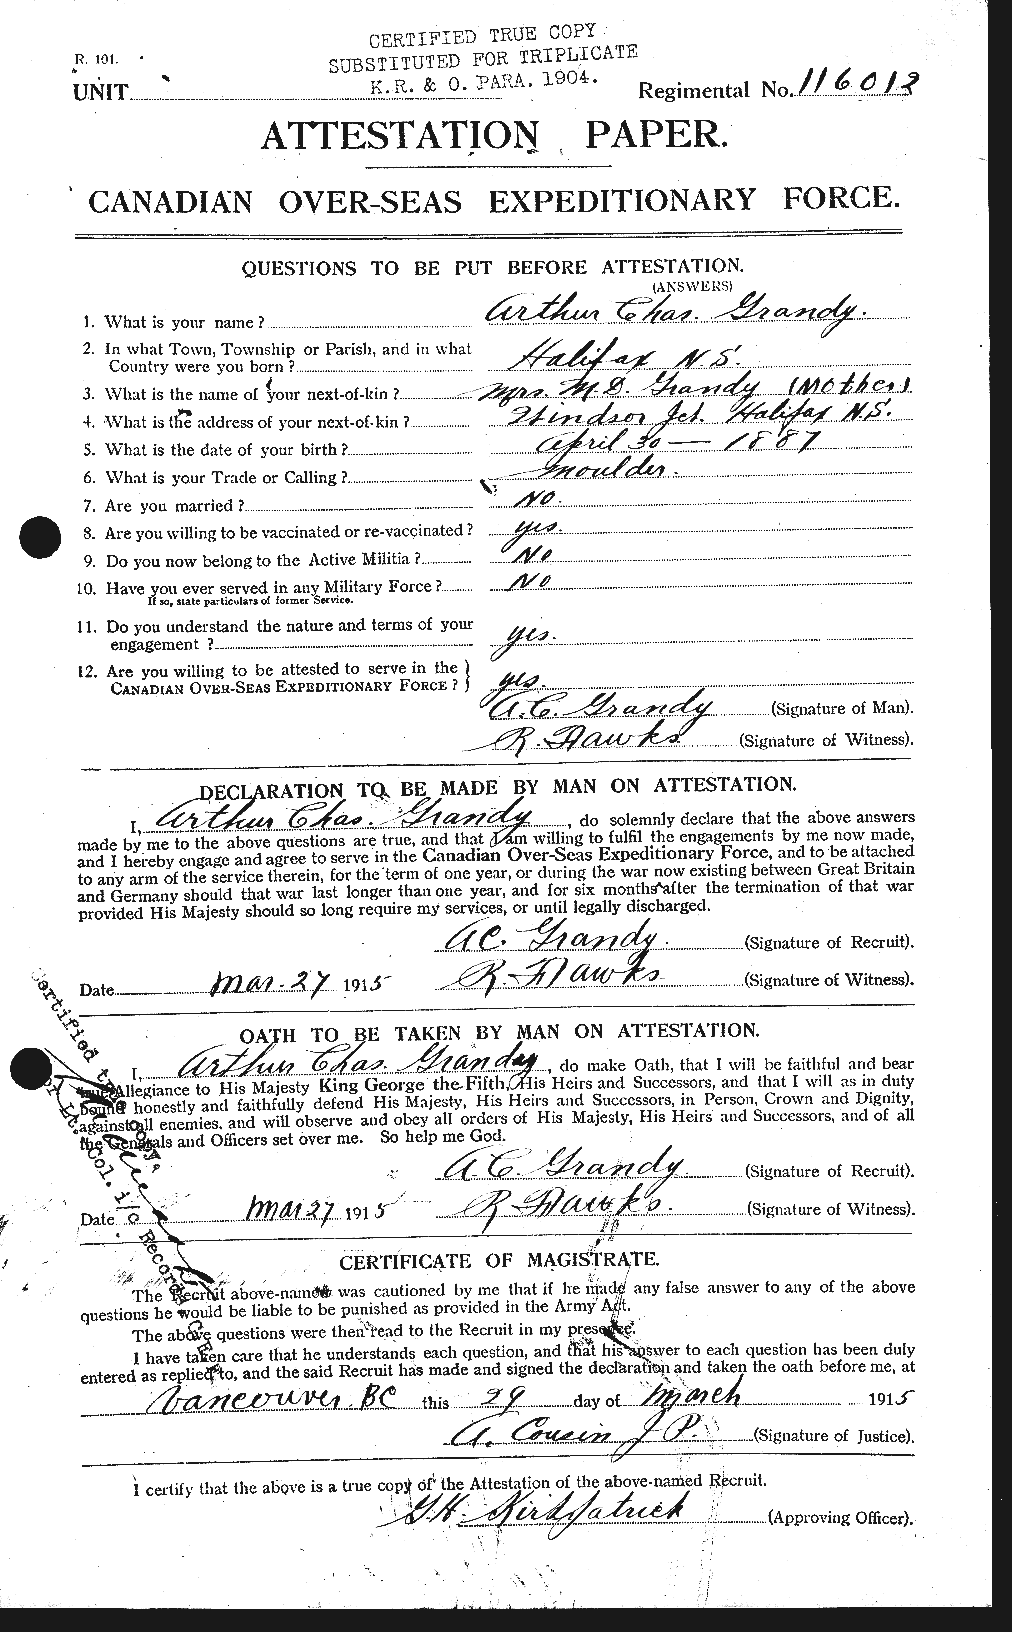 Personnel Records of the First World War - CEF 359054a